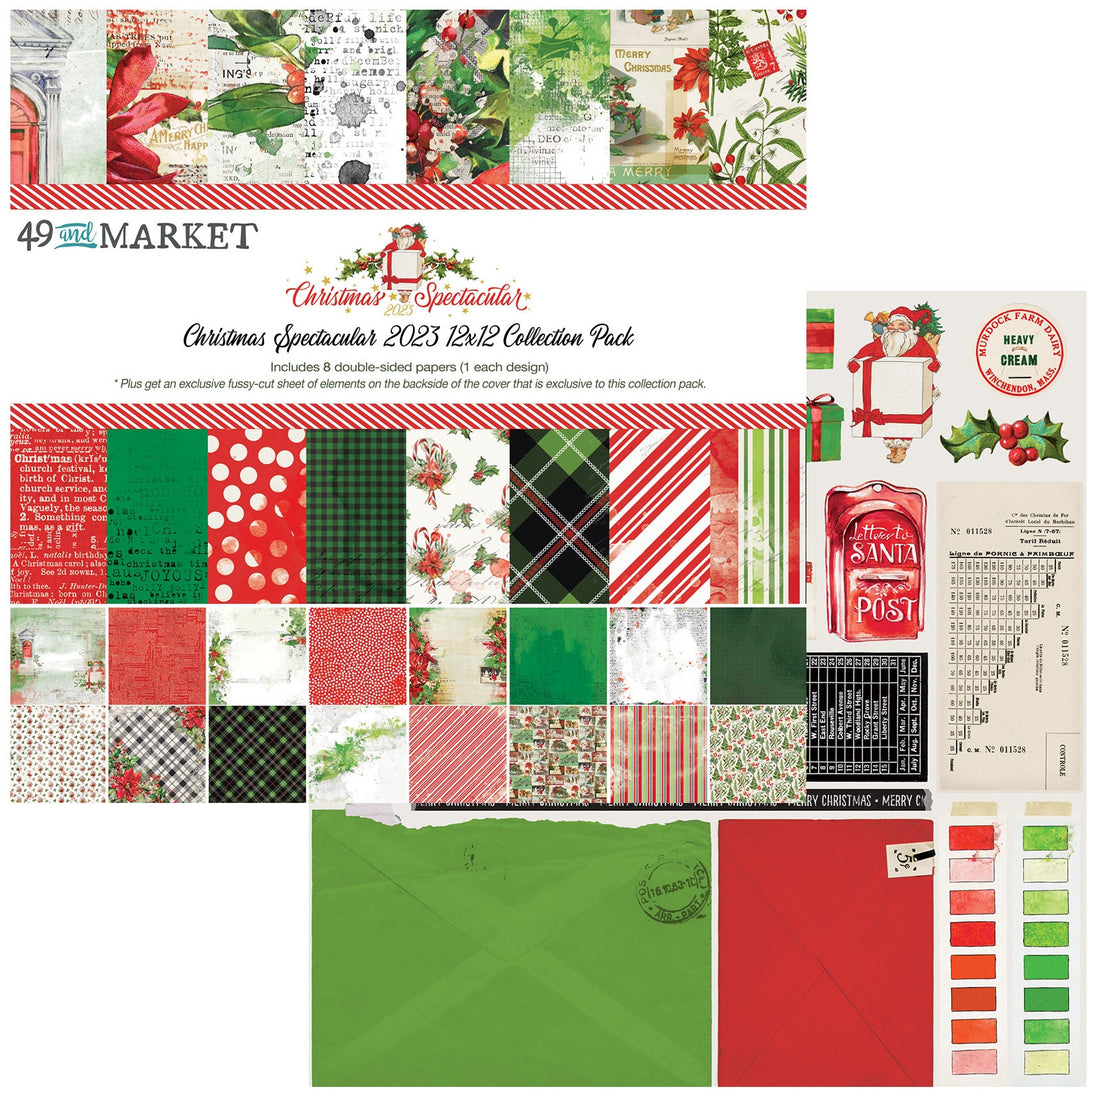 49 and Market Christmas Spectacular 2023 COLLECTION PACK